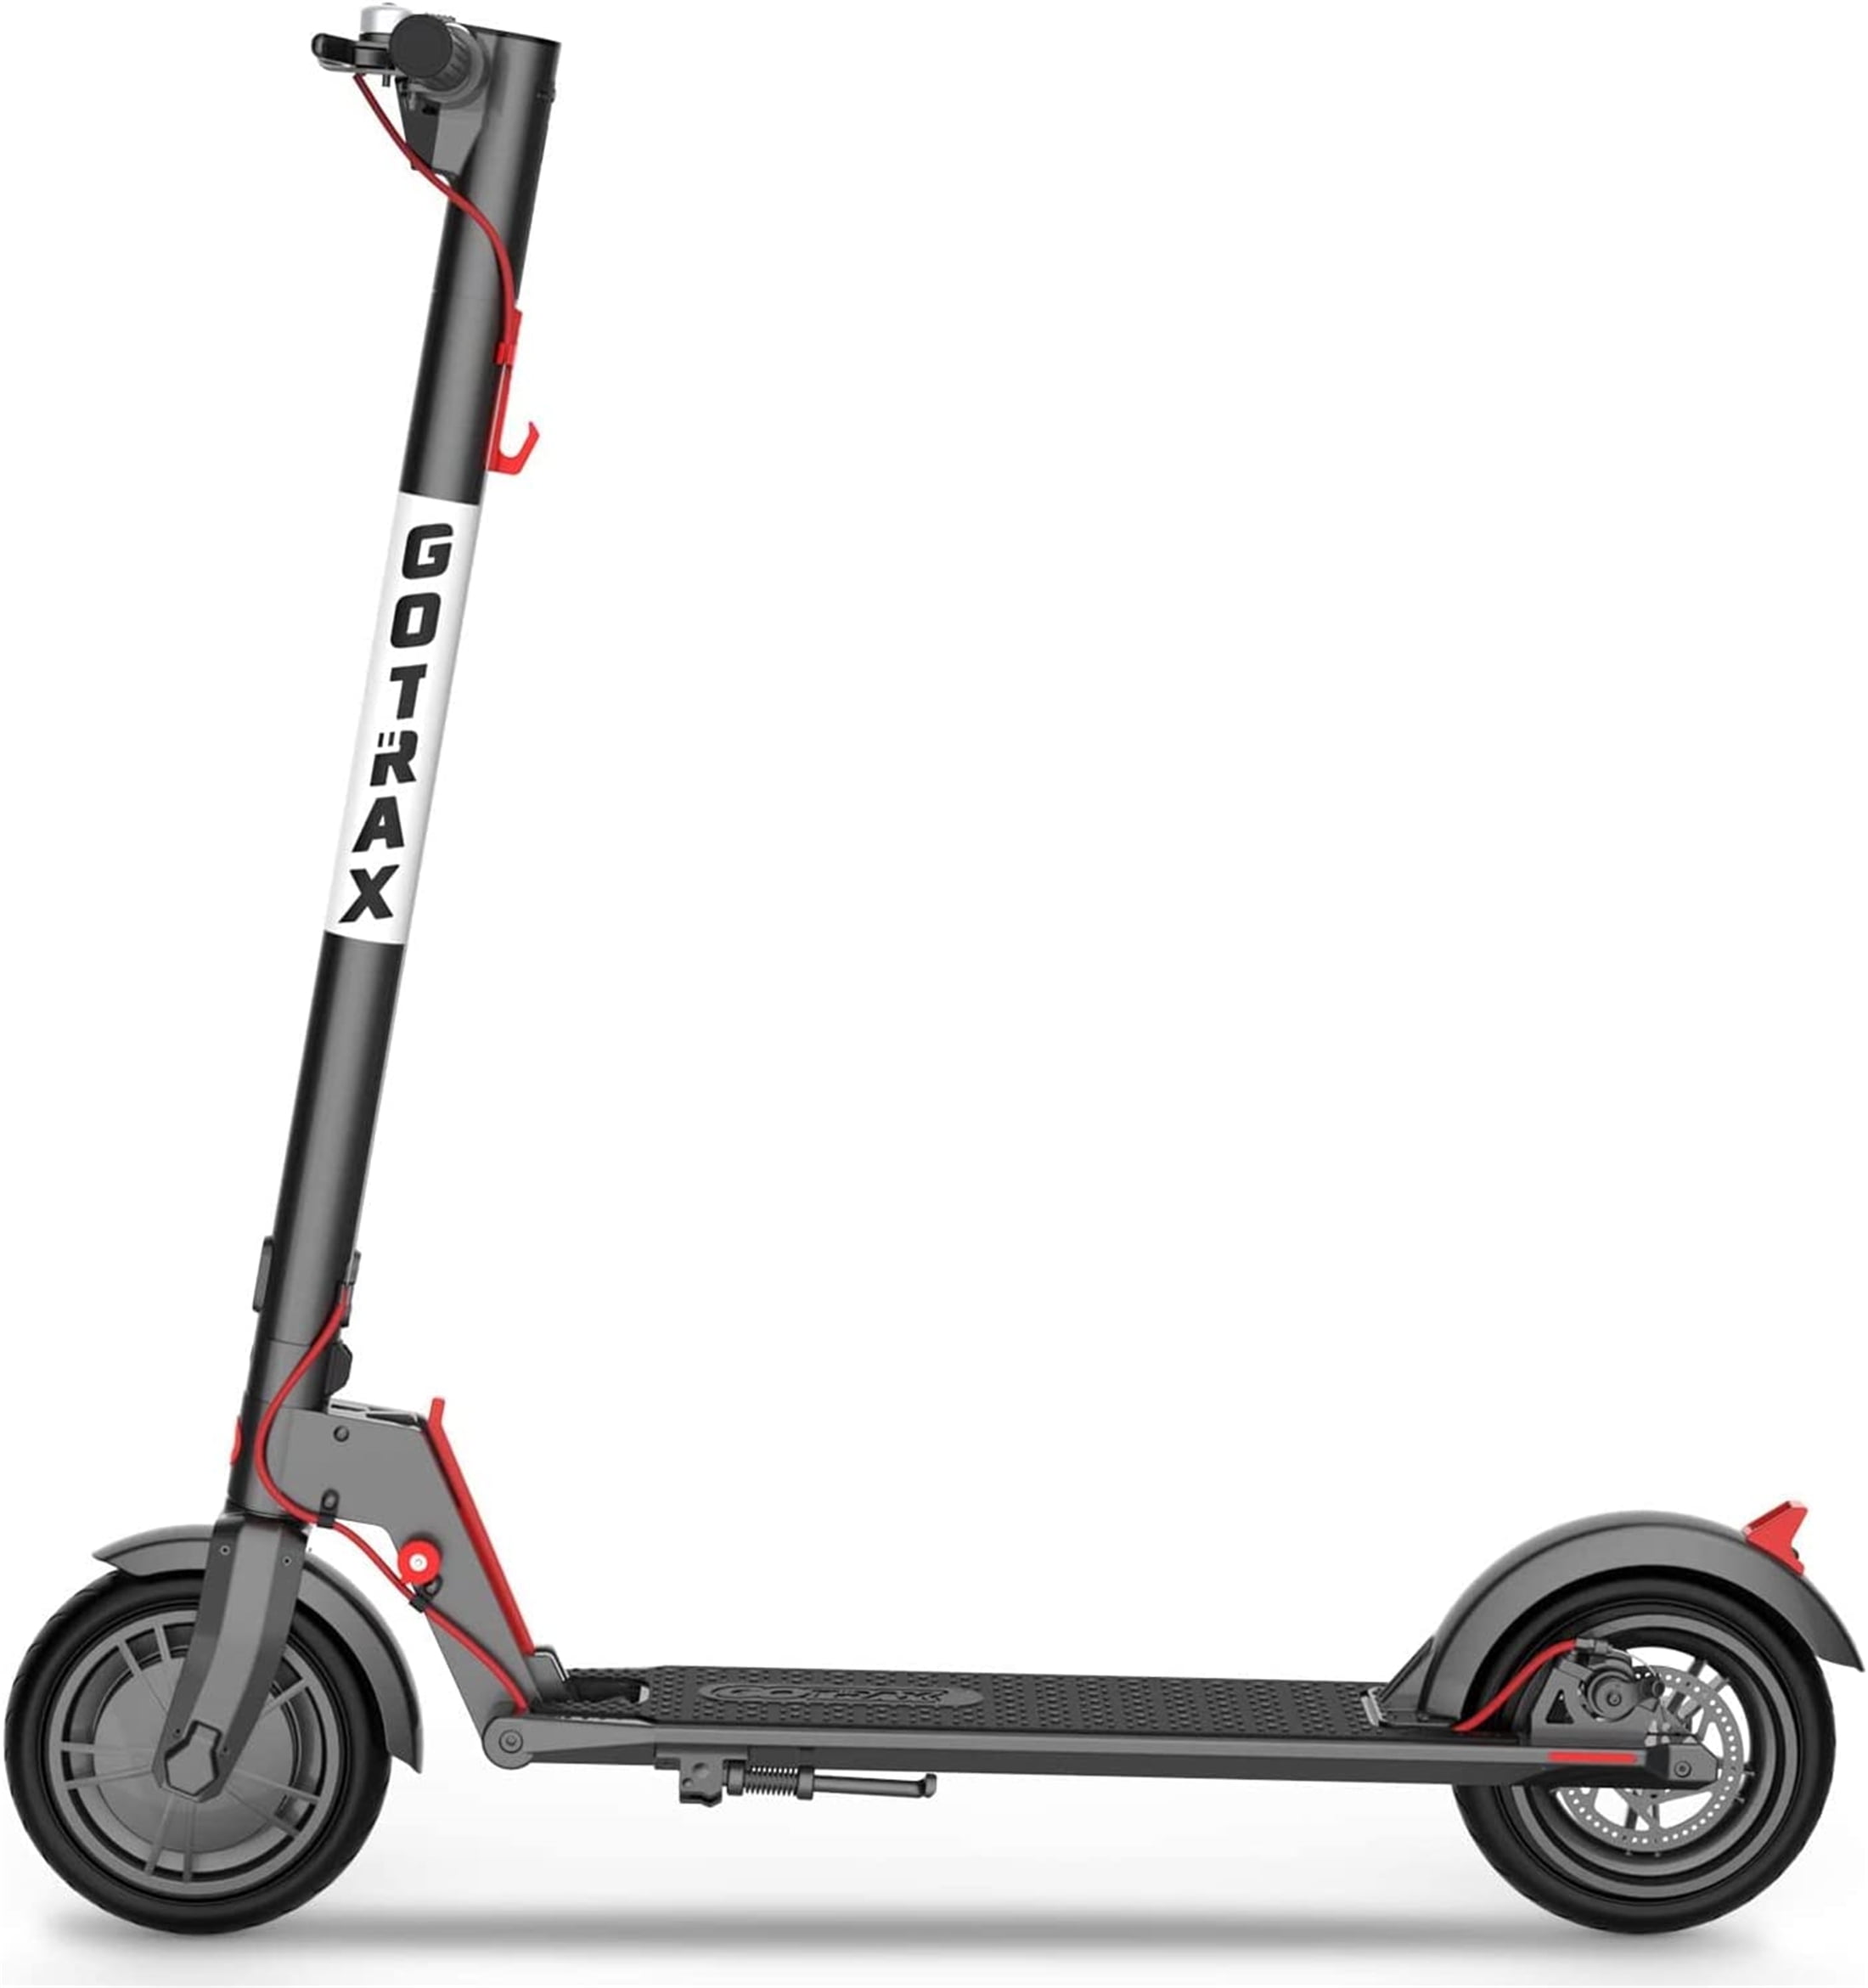 Rival Electric Scooter